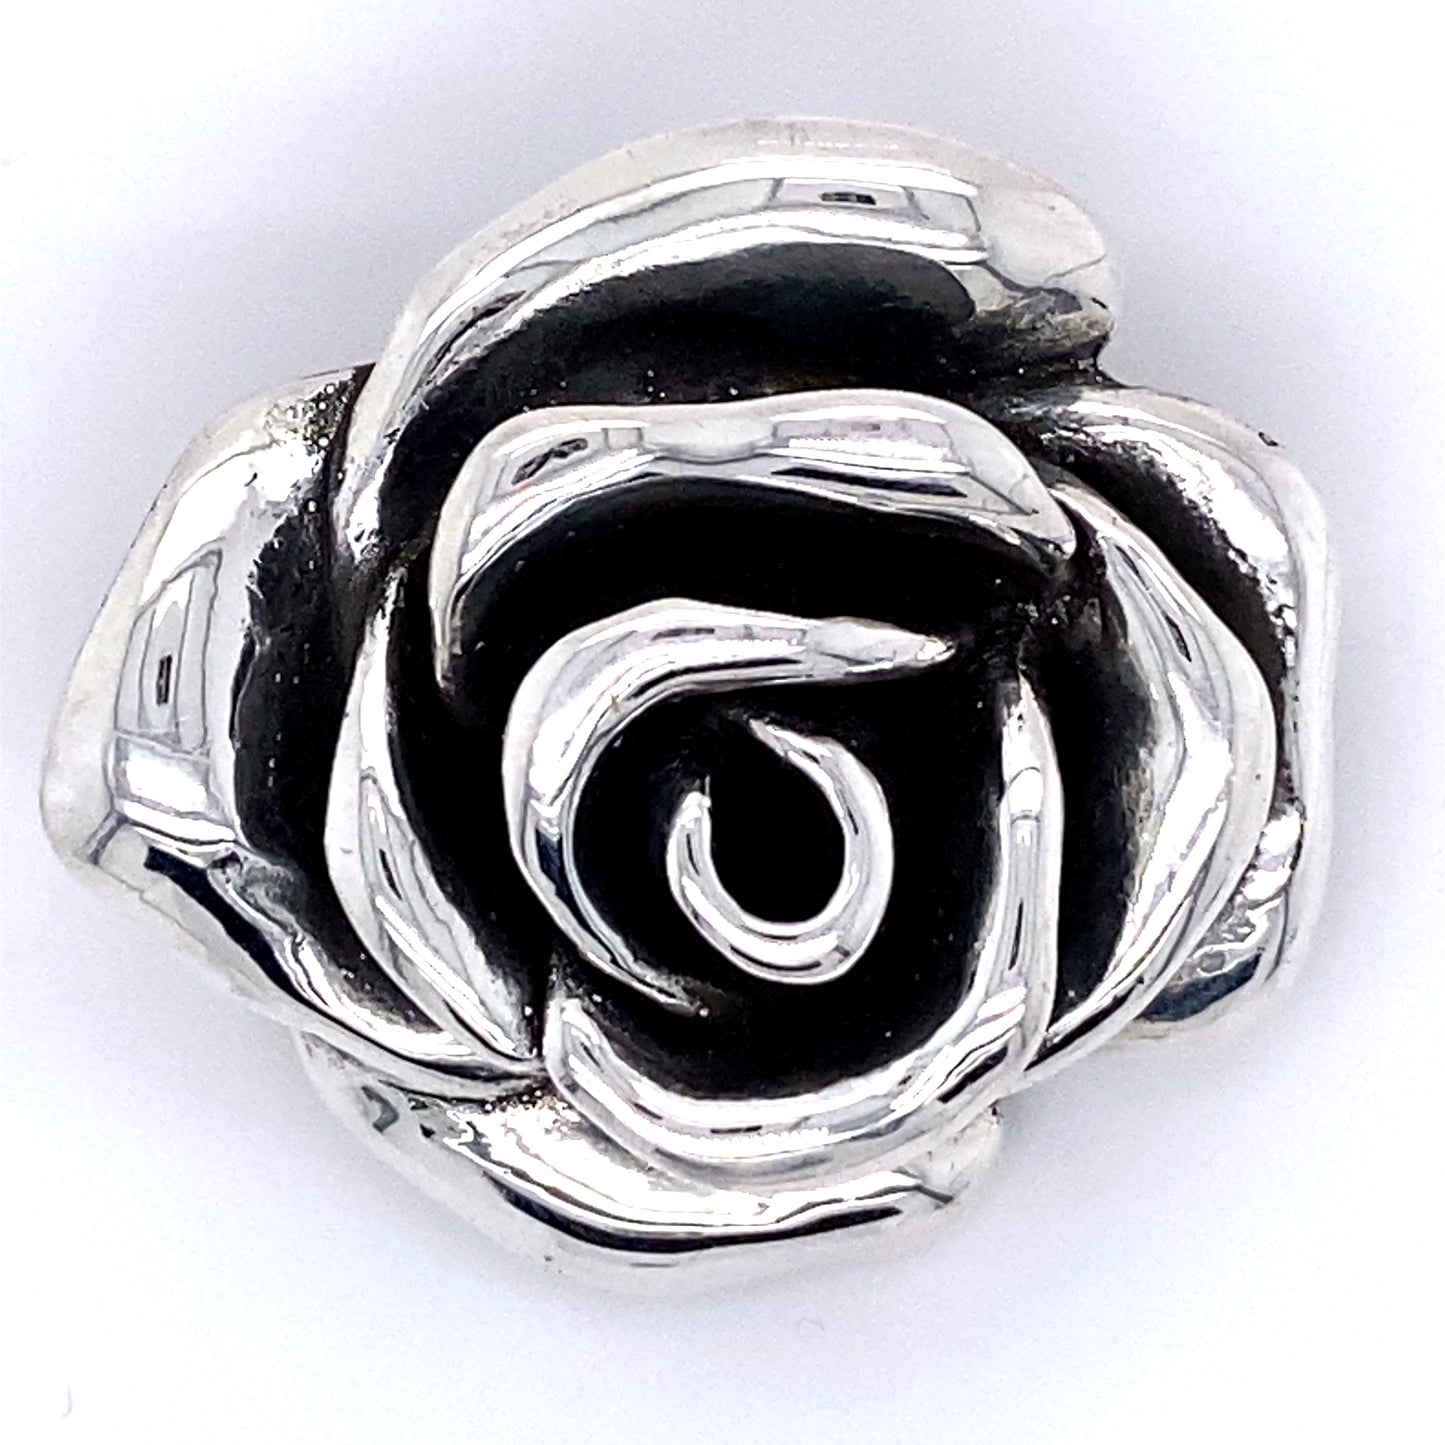 A Super Silver Stunning Electroformed Rose Pendant on a white background.